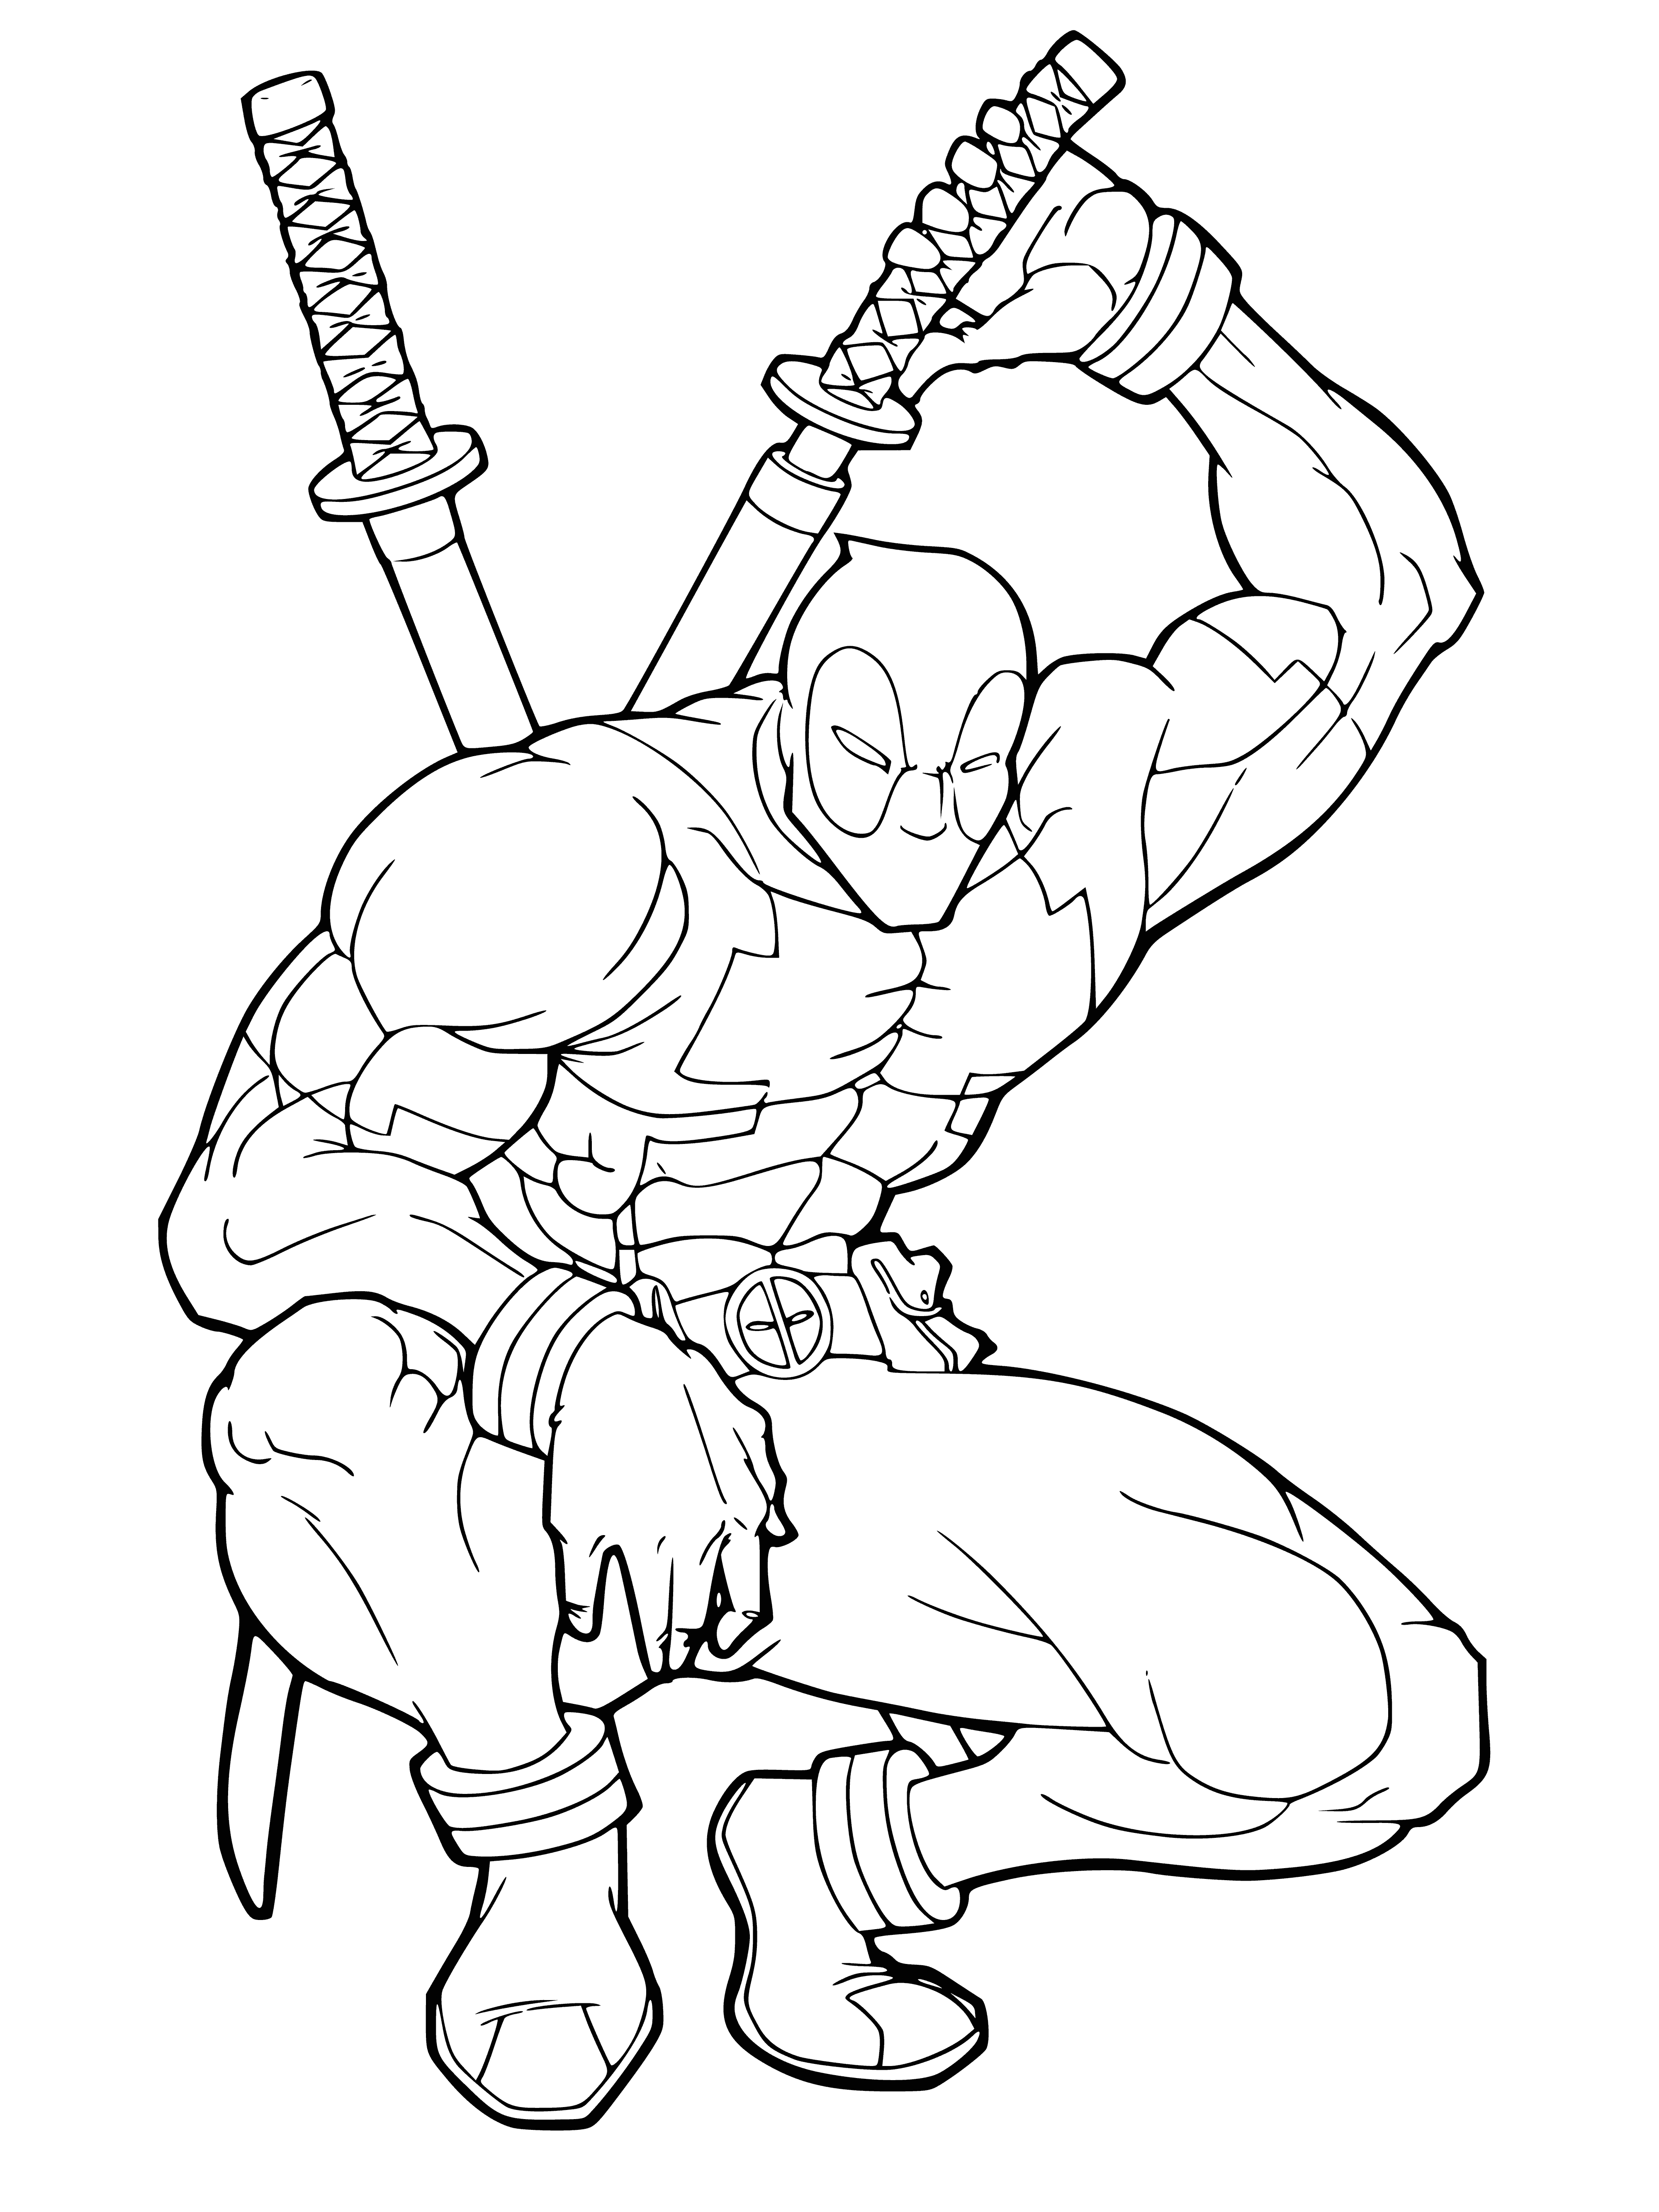 coloring page: Deadpool is a disfigured anti-hero mercenary with superhuman abilities; he is known for his comic quips, fourth wall breaks and running gags.